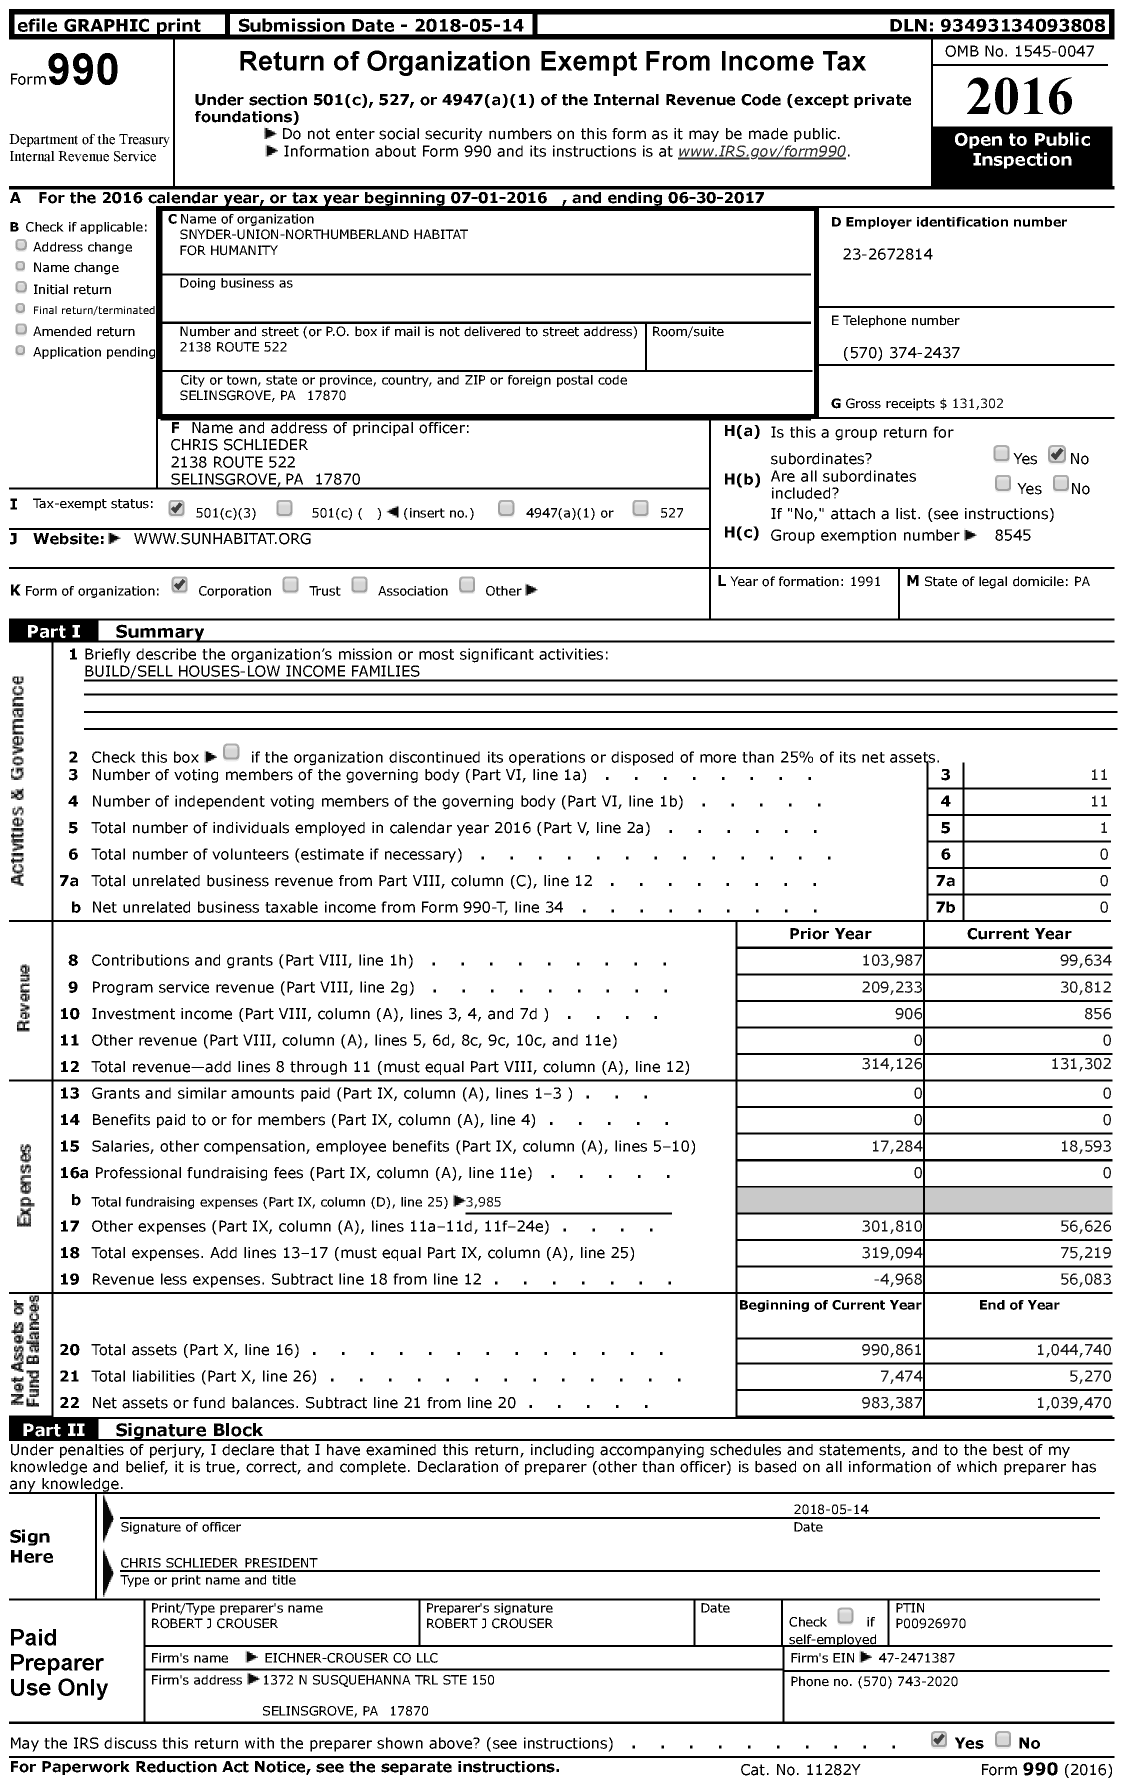 Image of first page of 2016 Form 990 for Snyder-Union-Northumberland Habitat for Humanity